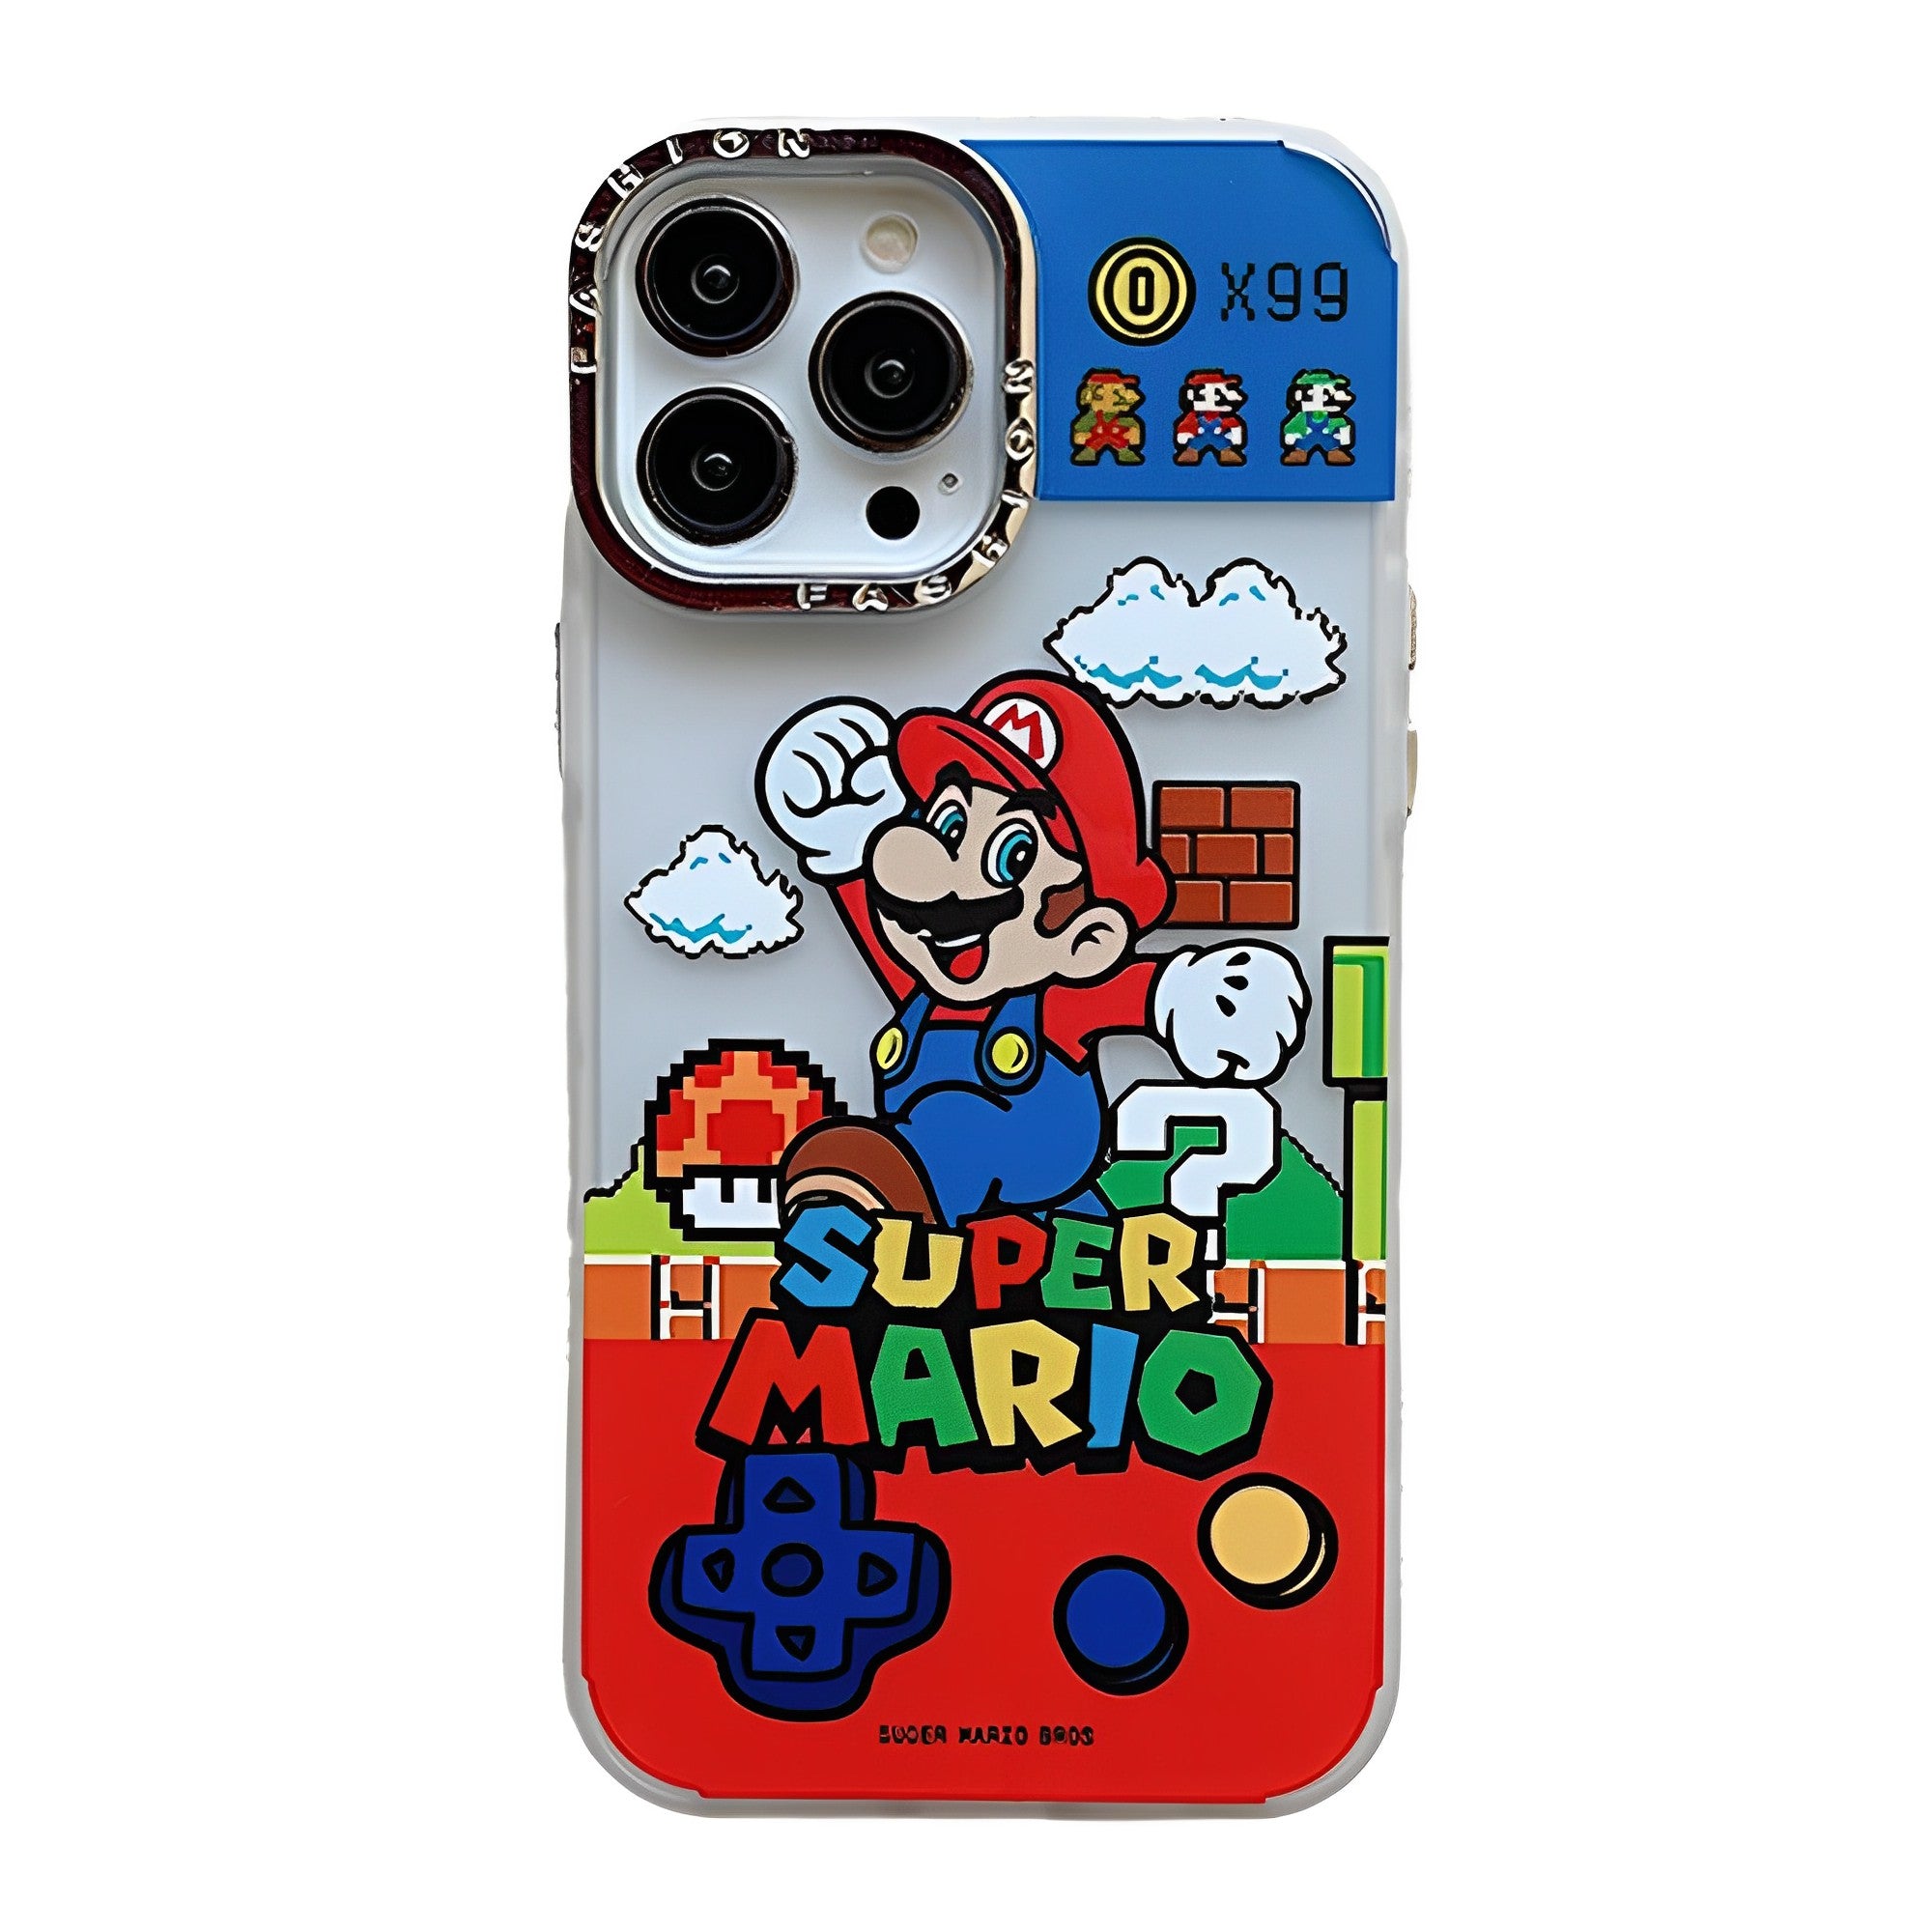 Super Mario × Toy Story iphone Case